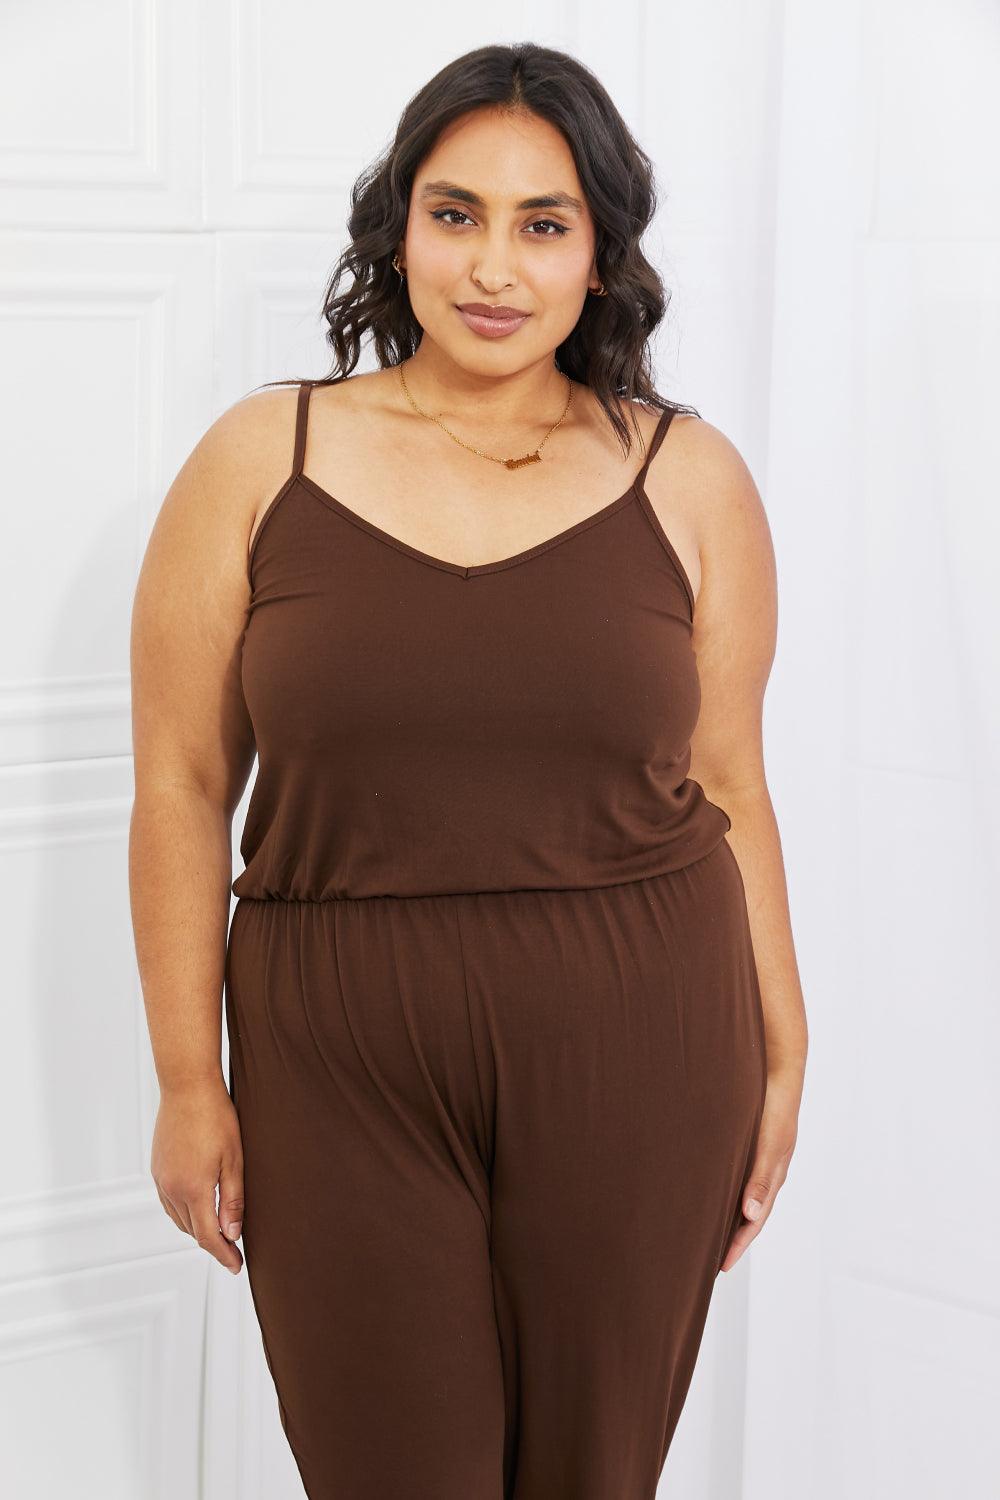 Bona Fide Fashion - Comfy Casual Full Size Solid Elastic Waistband Jumpsuit in Chocolate - Women Fashion - Bona Fide Fashion